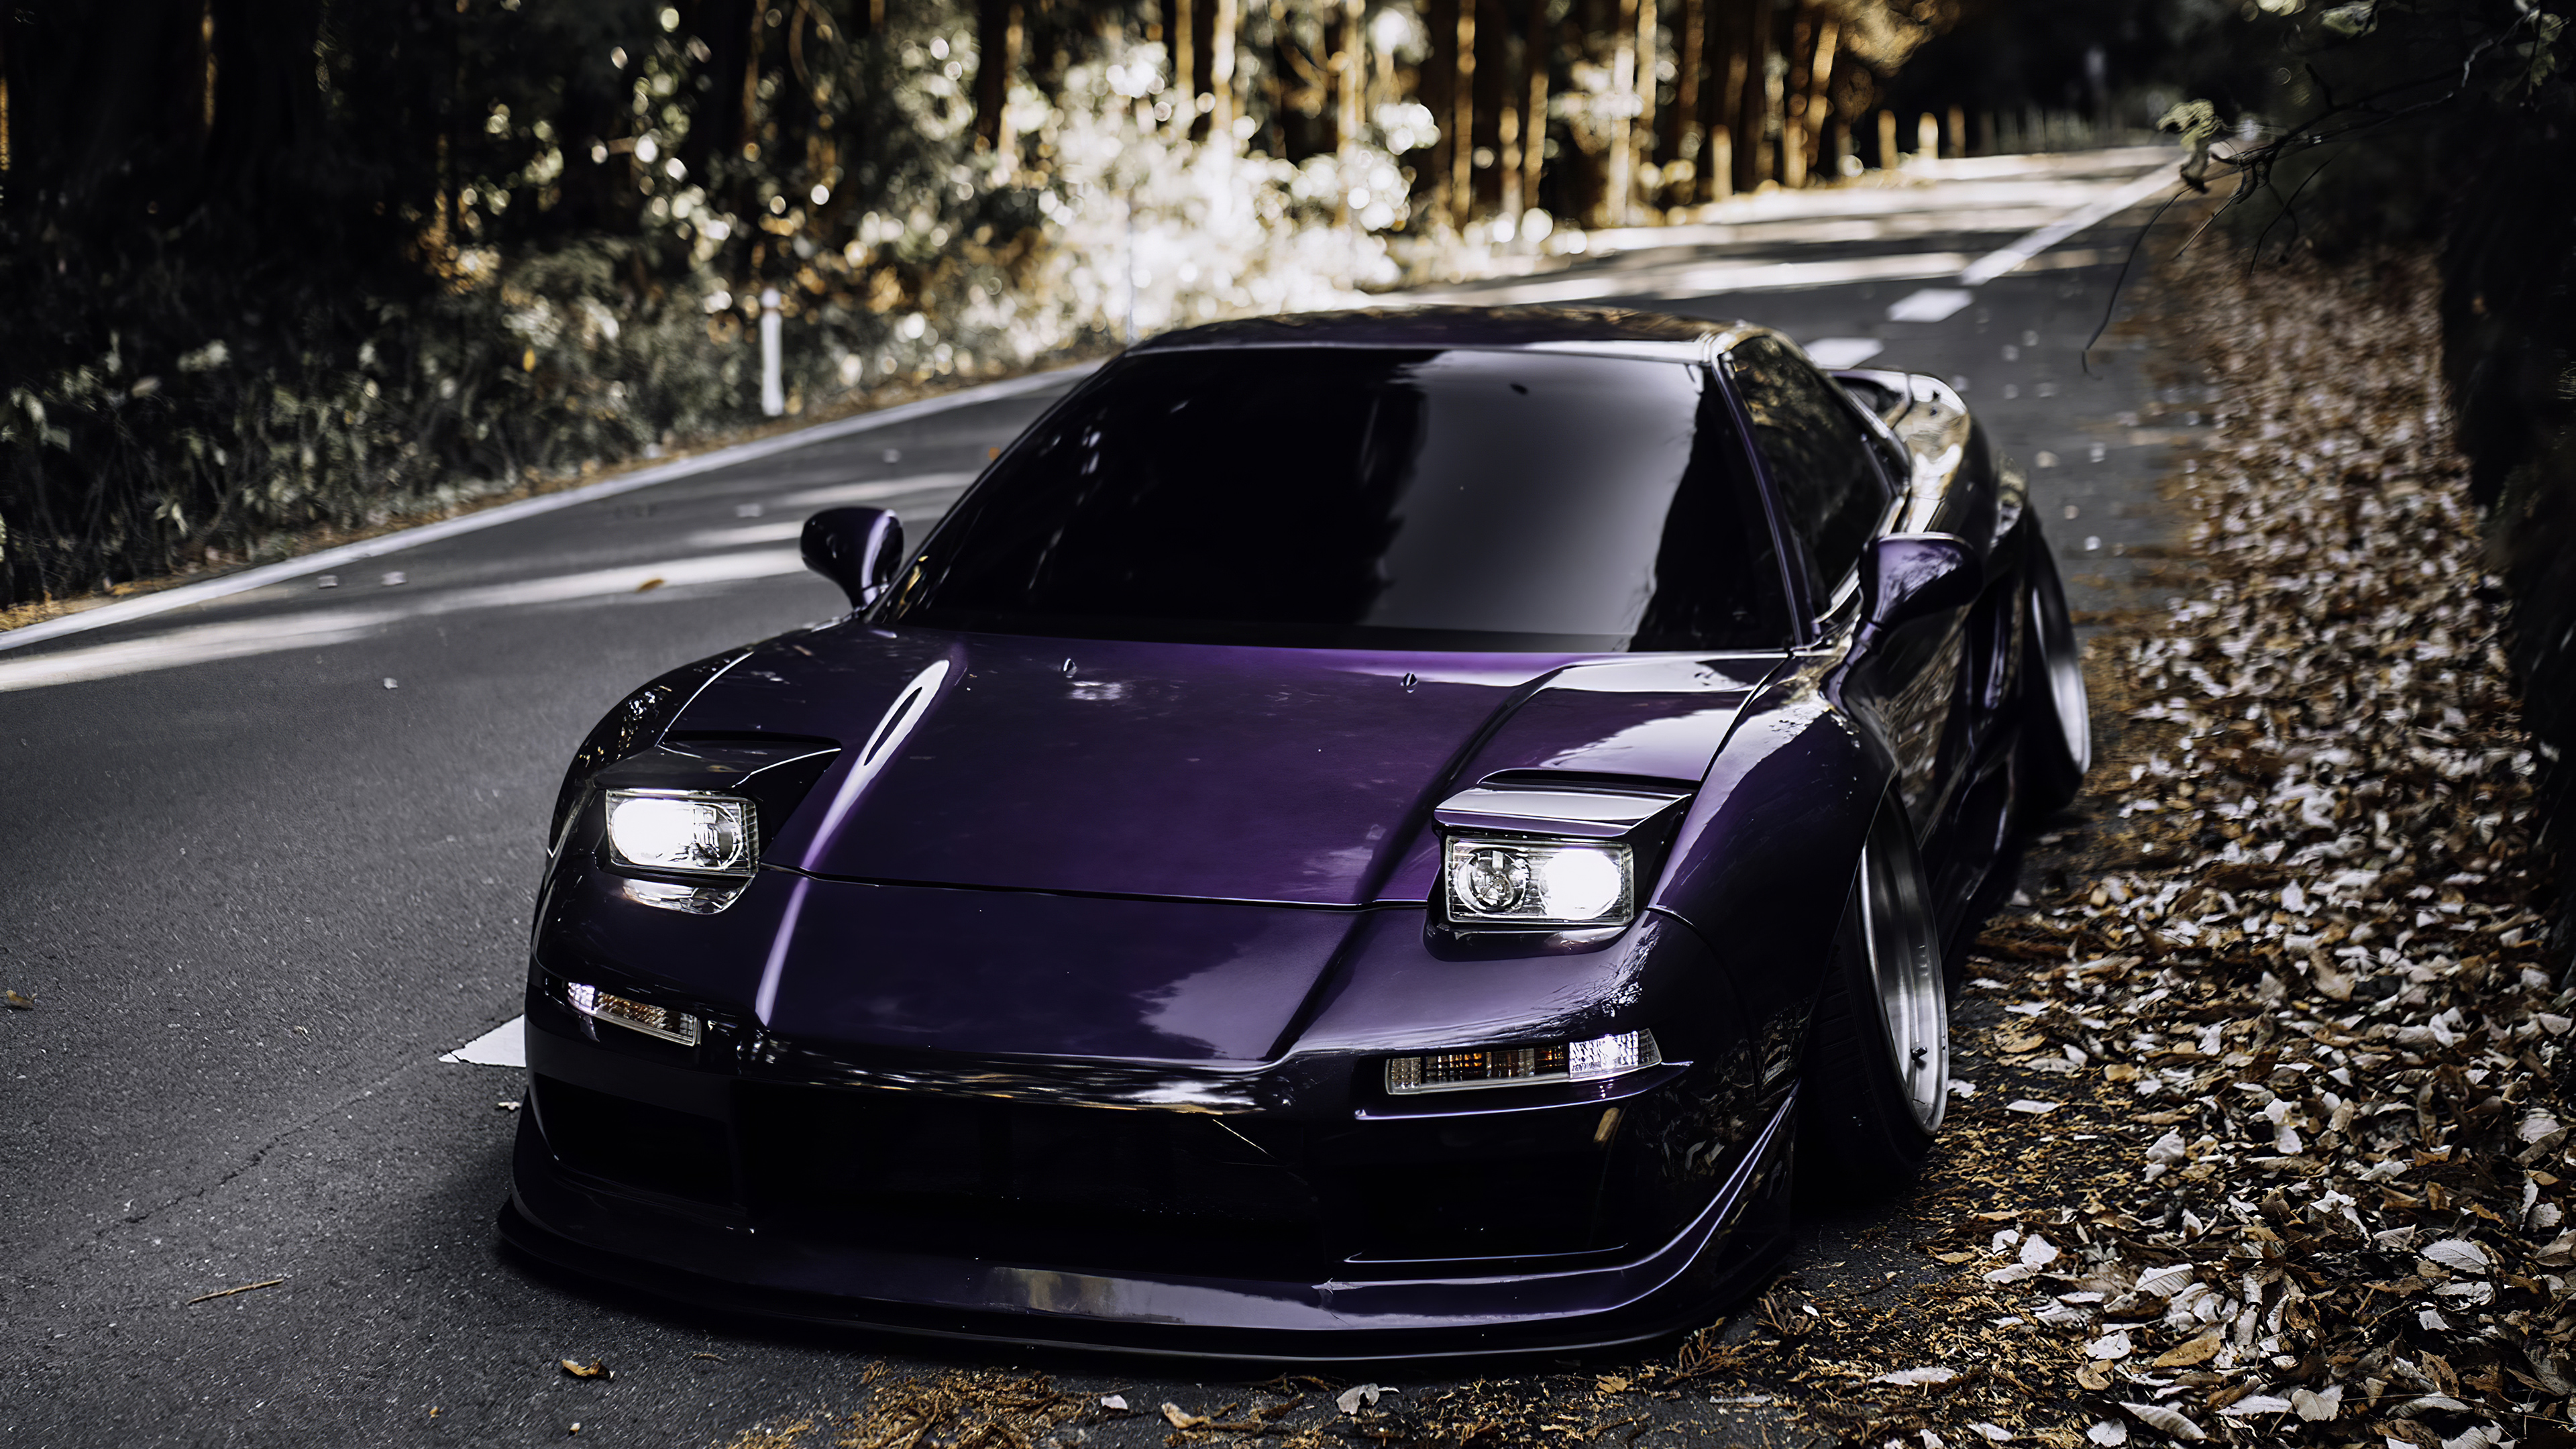 Undervalued Acura NSX in purple stands on the curb with fallen leaves